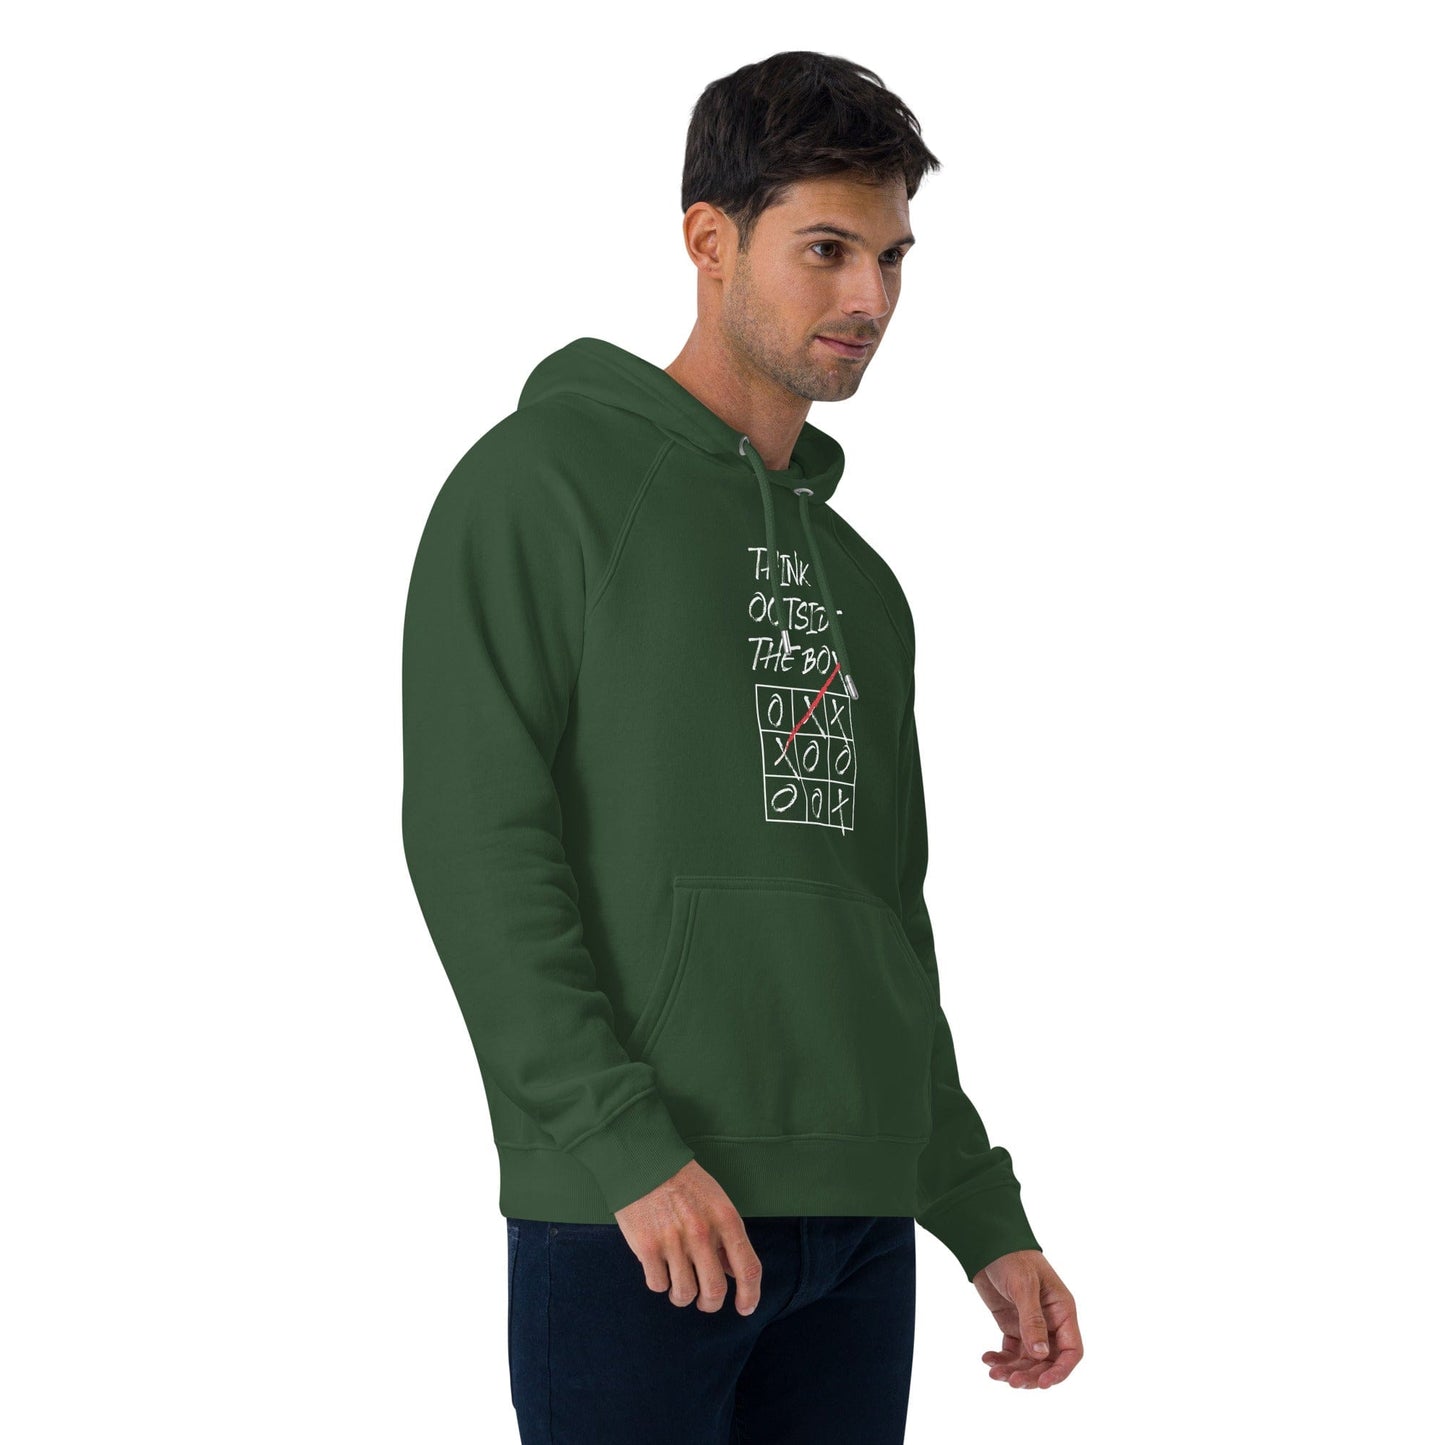 Think Outside The Box - Eco Hoodie